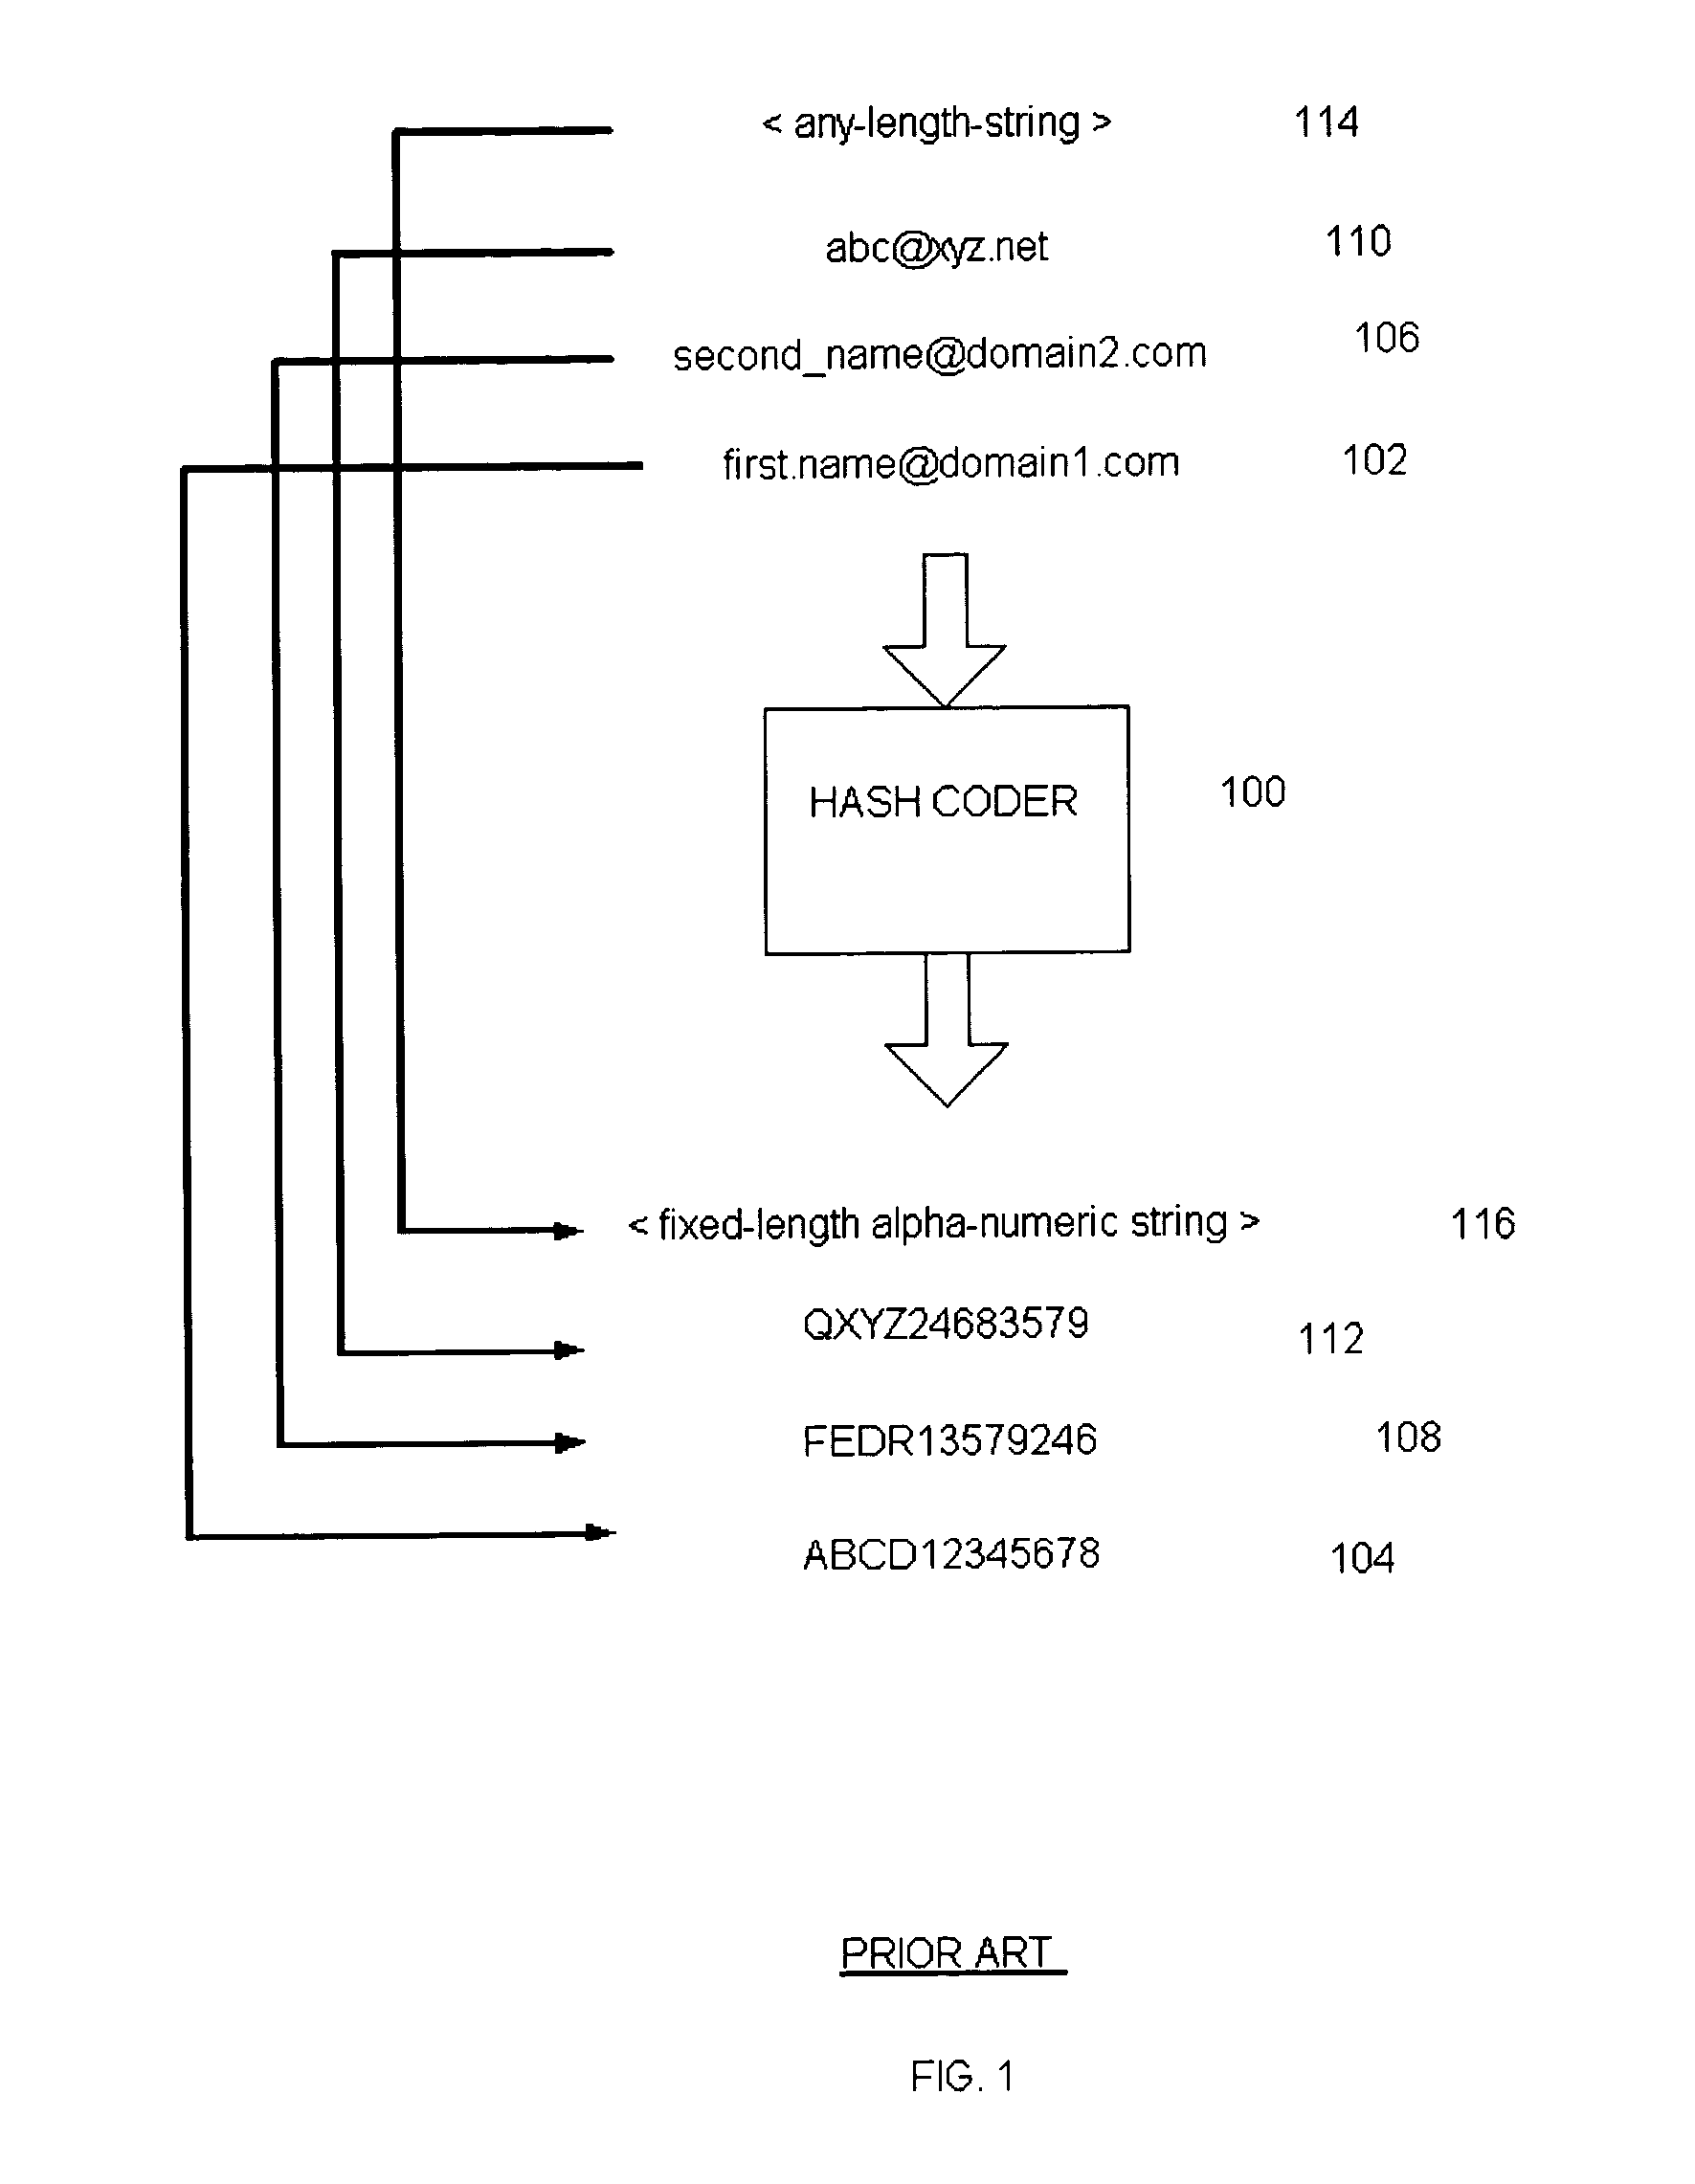 Apparatus and method for precluding e-mail distribution